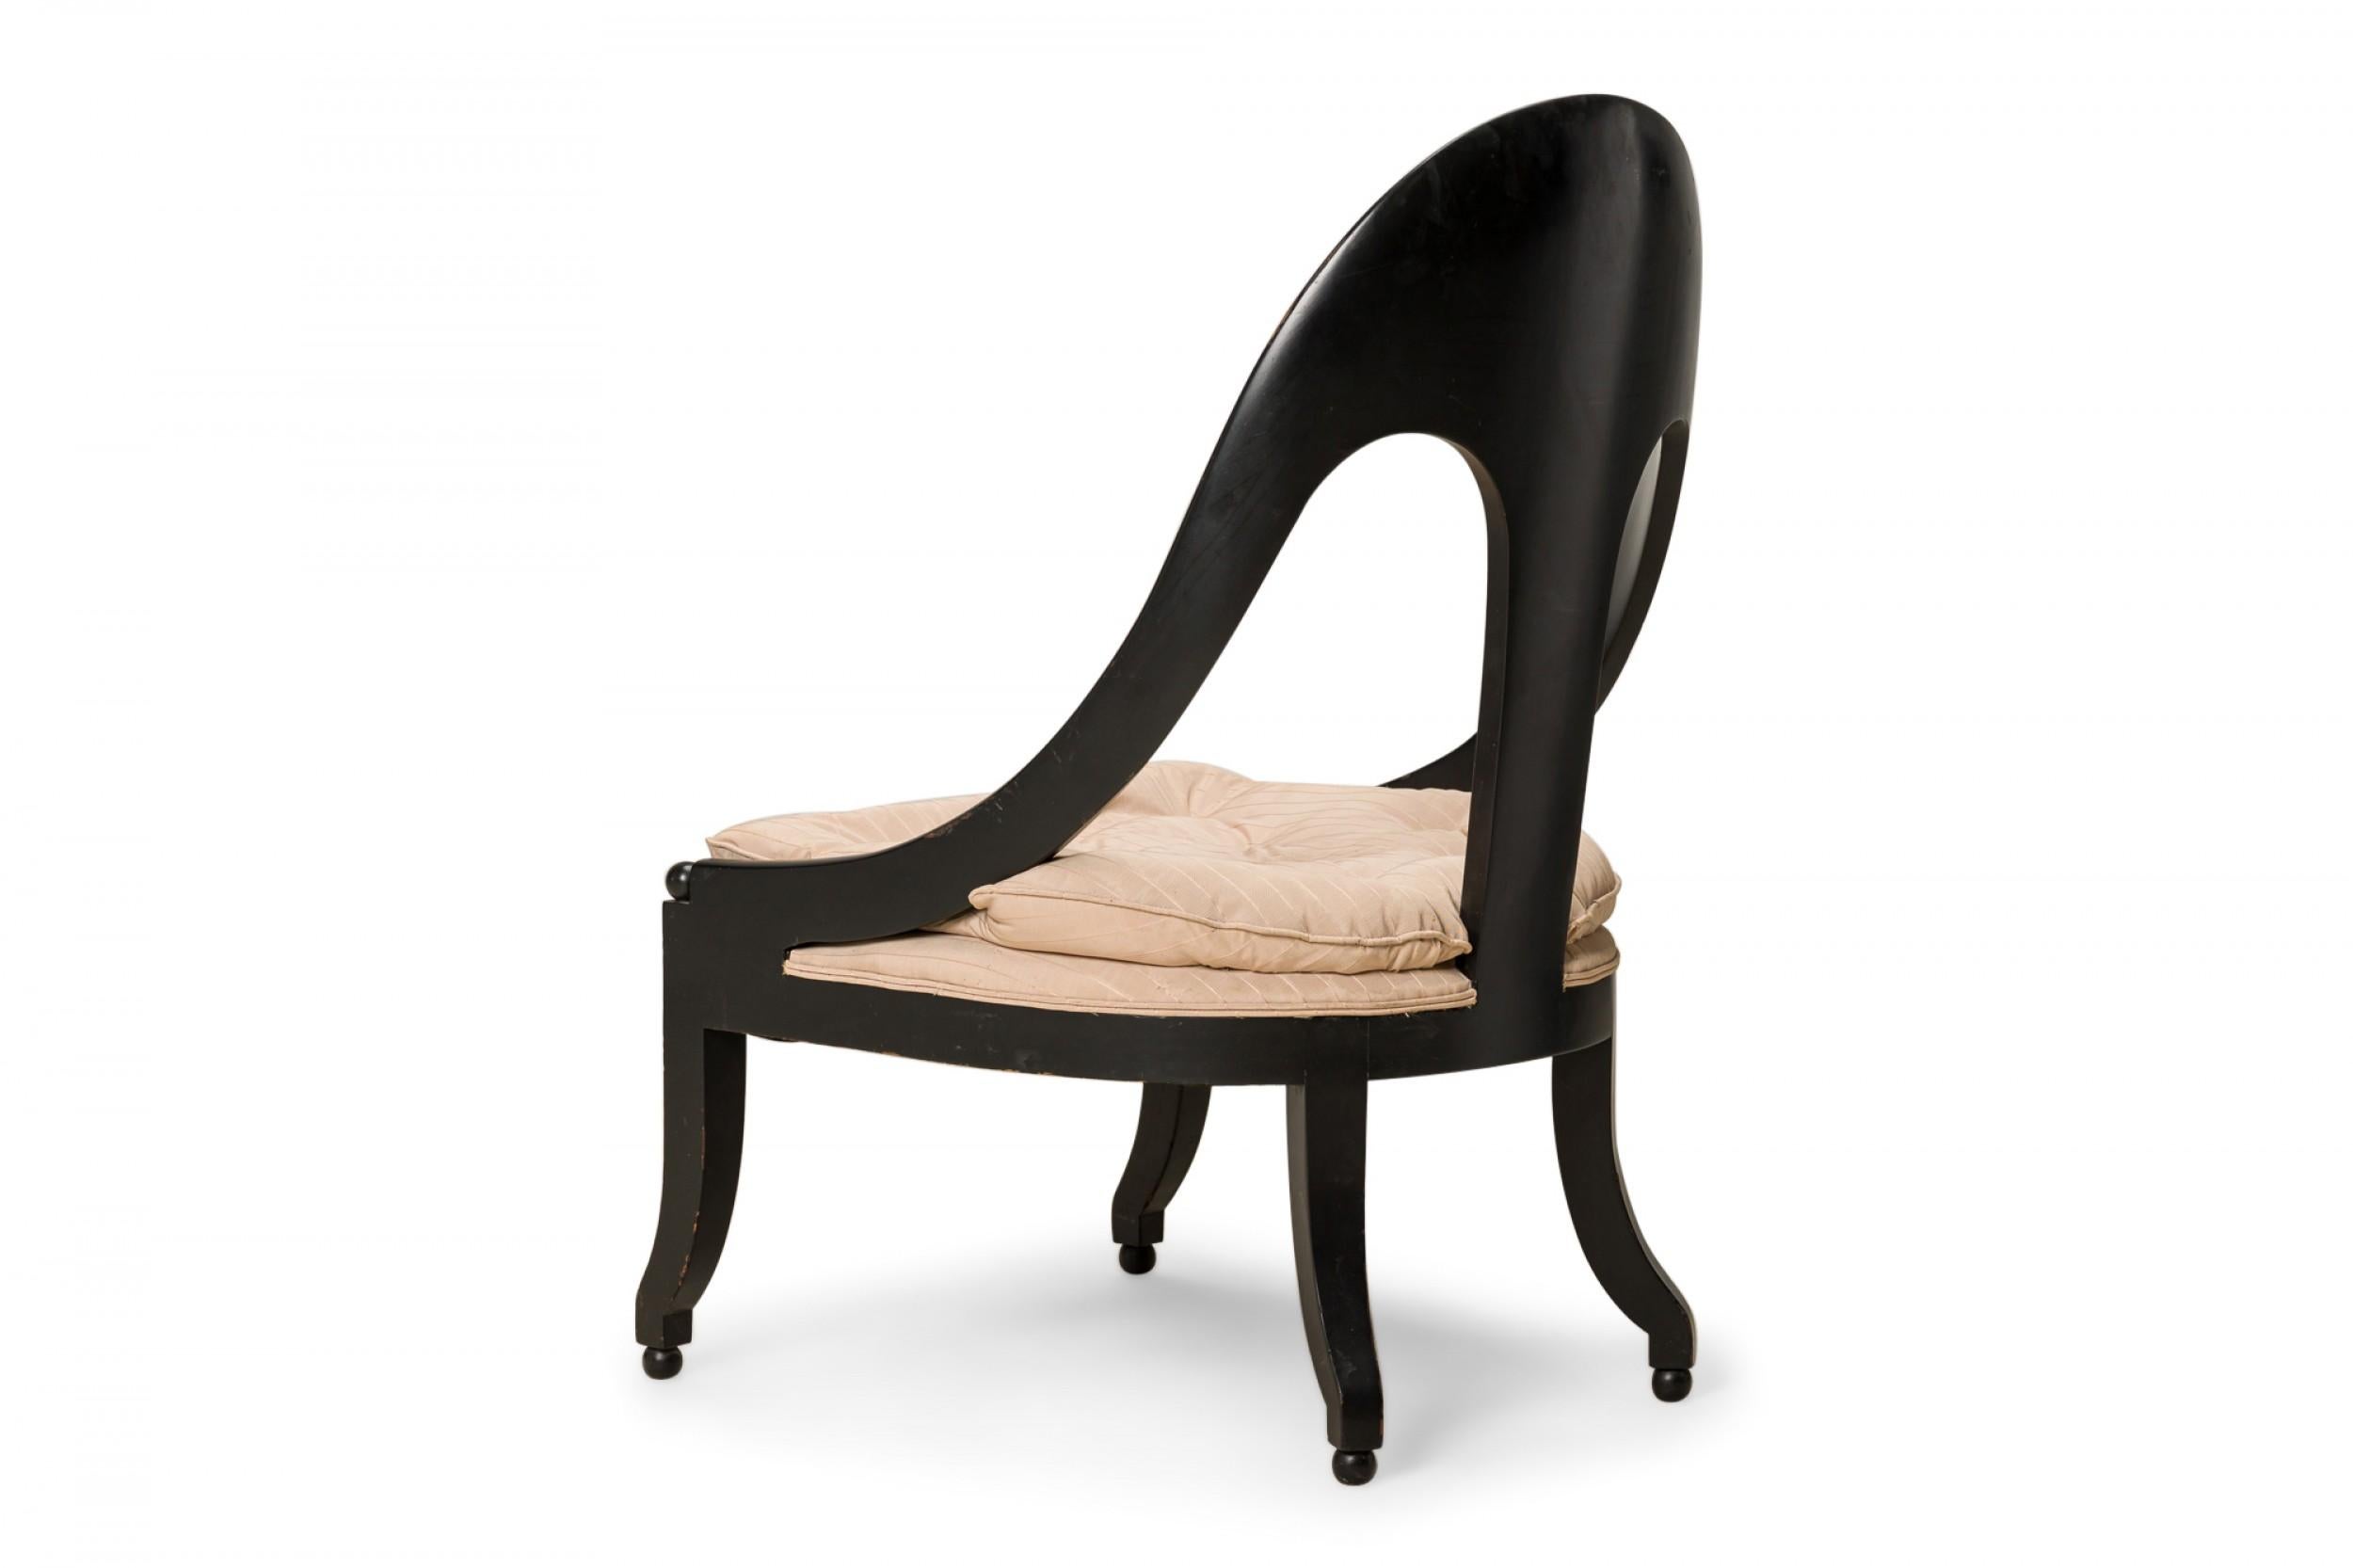 American Black Lacquered Wood and Rose Upholstery Spoon Back Side Chair